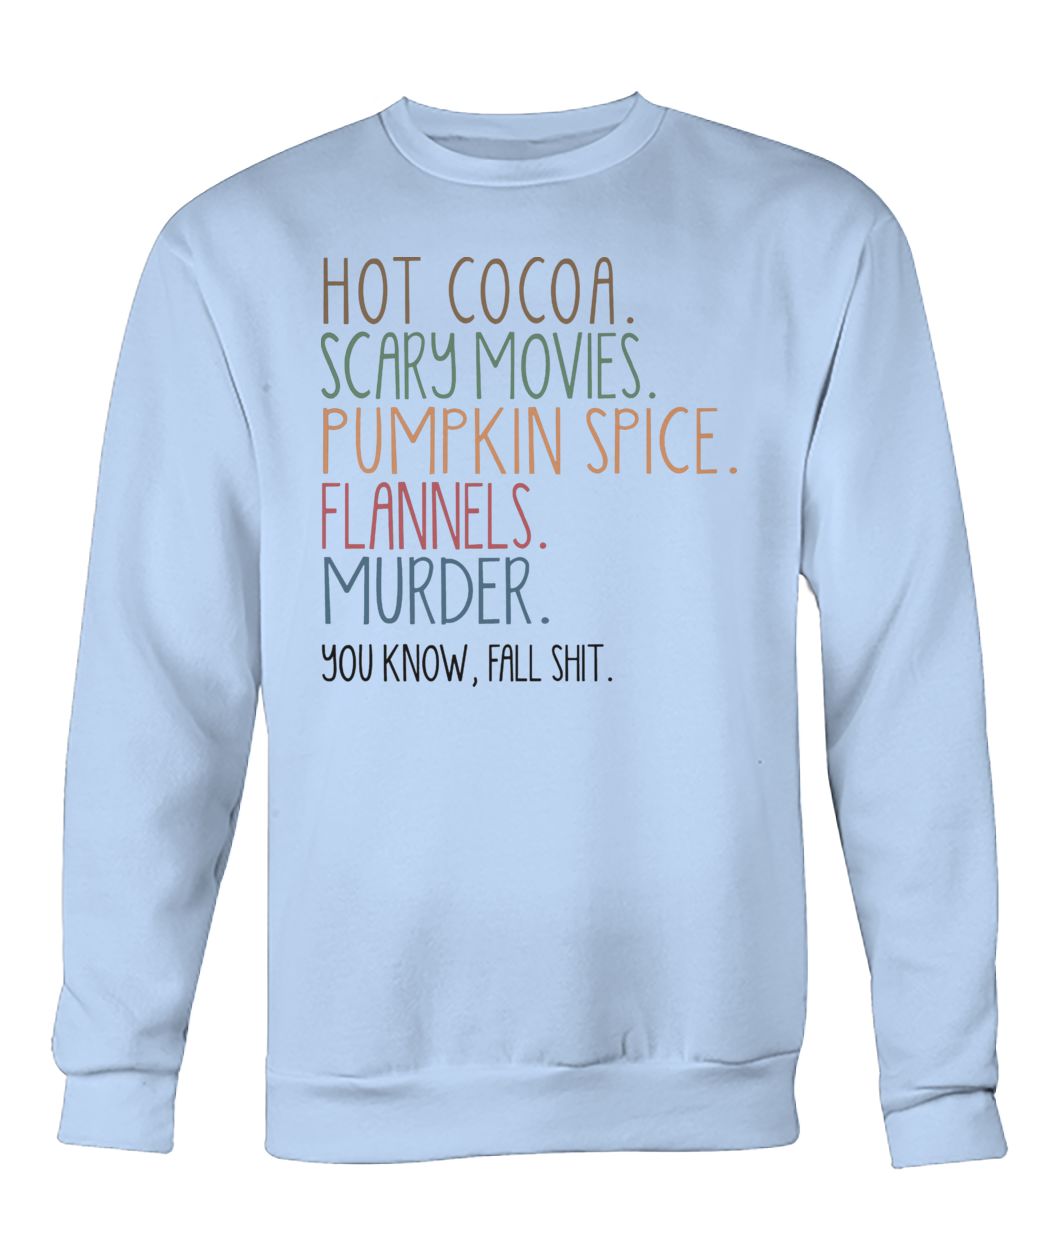 Hot cocoa scary movies pumpkin spice flannels murder you know fal shit crew neck sweatshirt